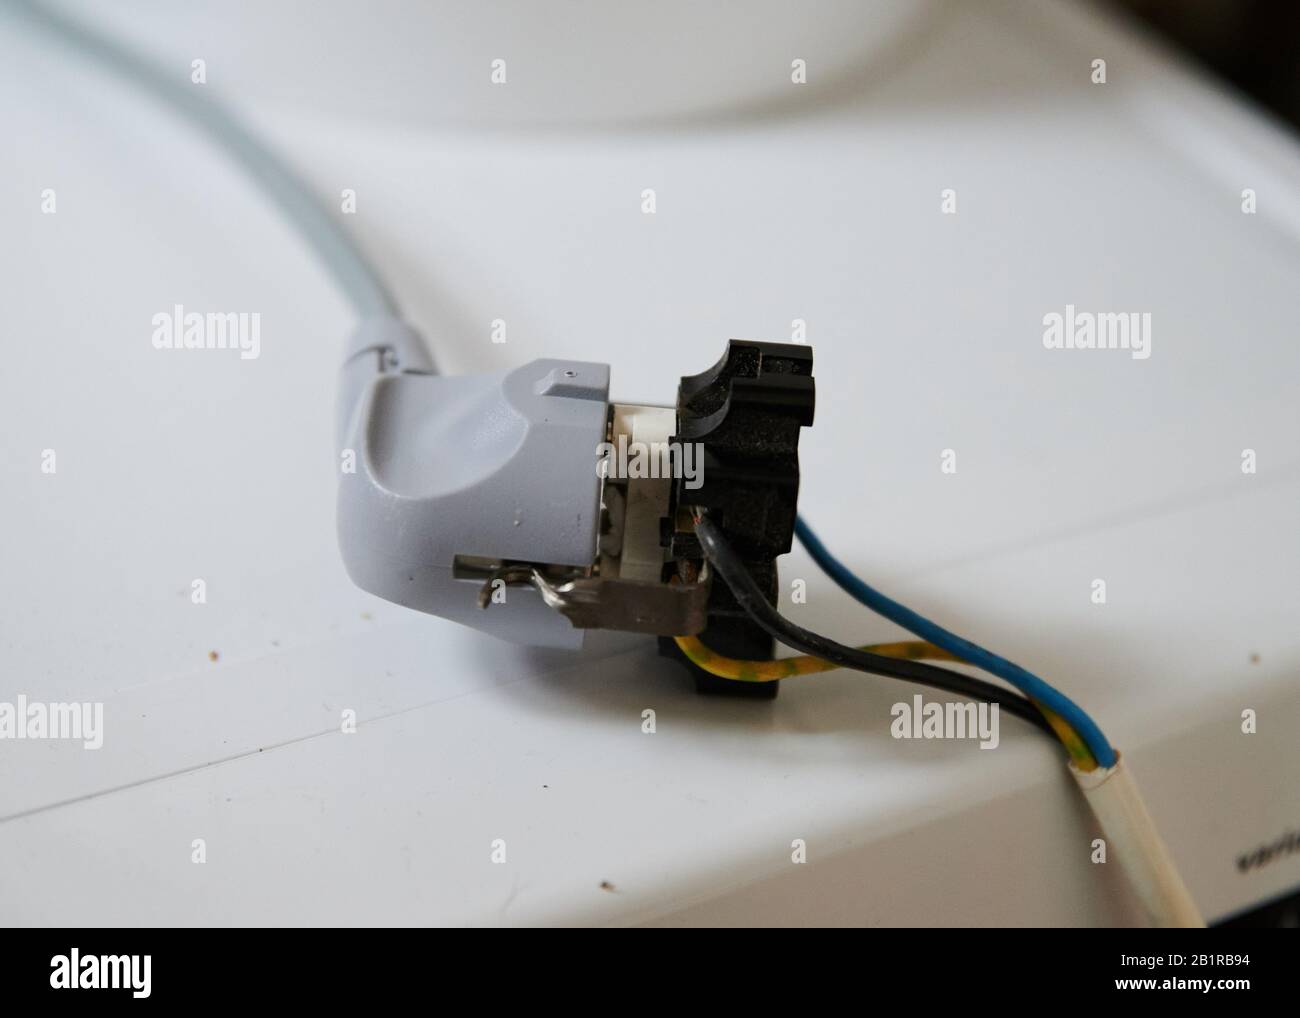 Berlin, Germany. 13th Feb, 2020. A plug is stuck in a broken torn out socket with exposed cables. Credit: Annette Riedl/dpa/Alamy Live News Stock Photo